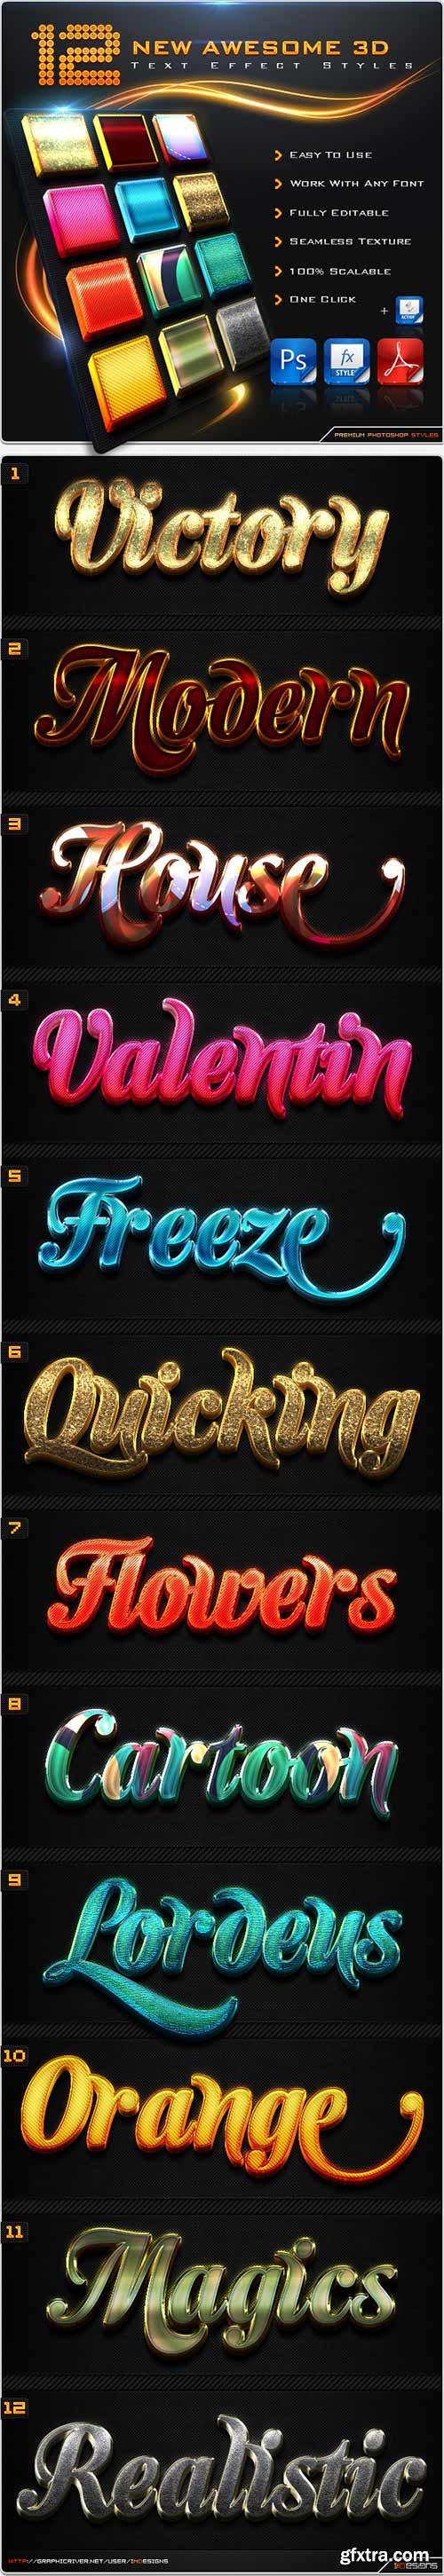 GraphicRiver 8604061 - 12 New Awesome 3D Text Effect Styles + Actions